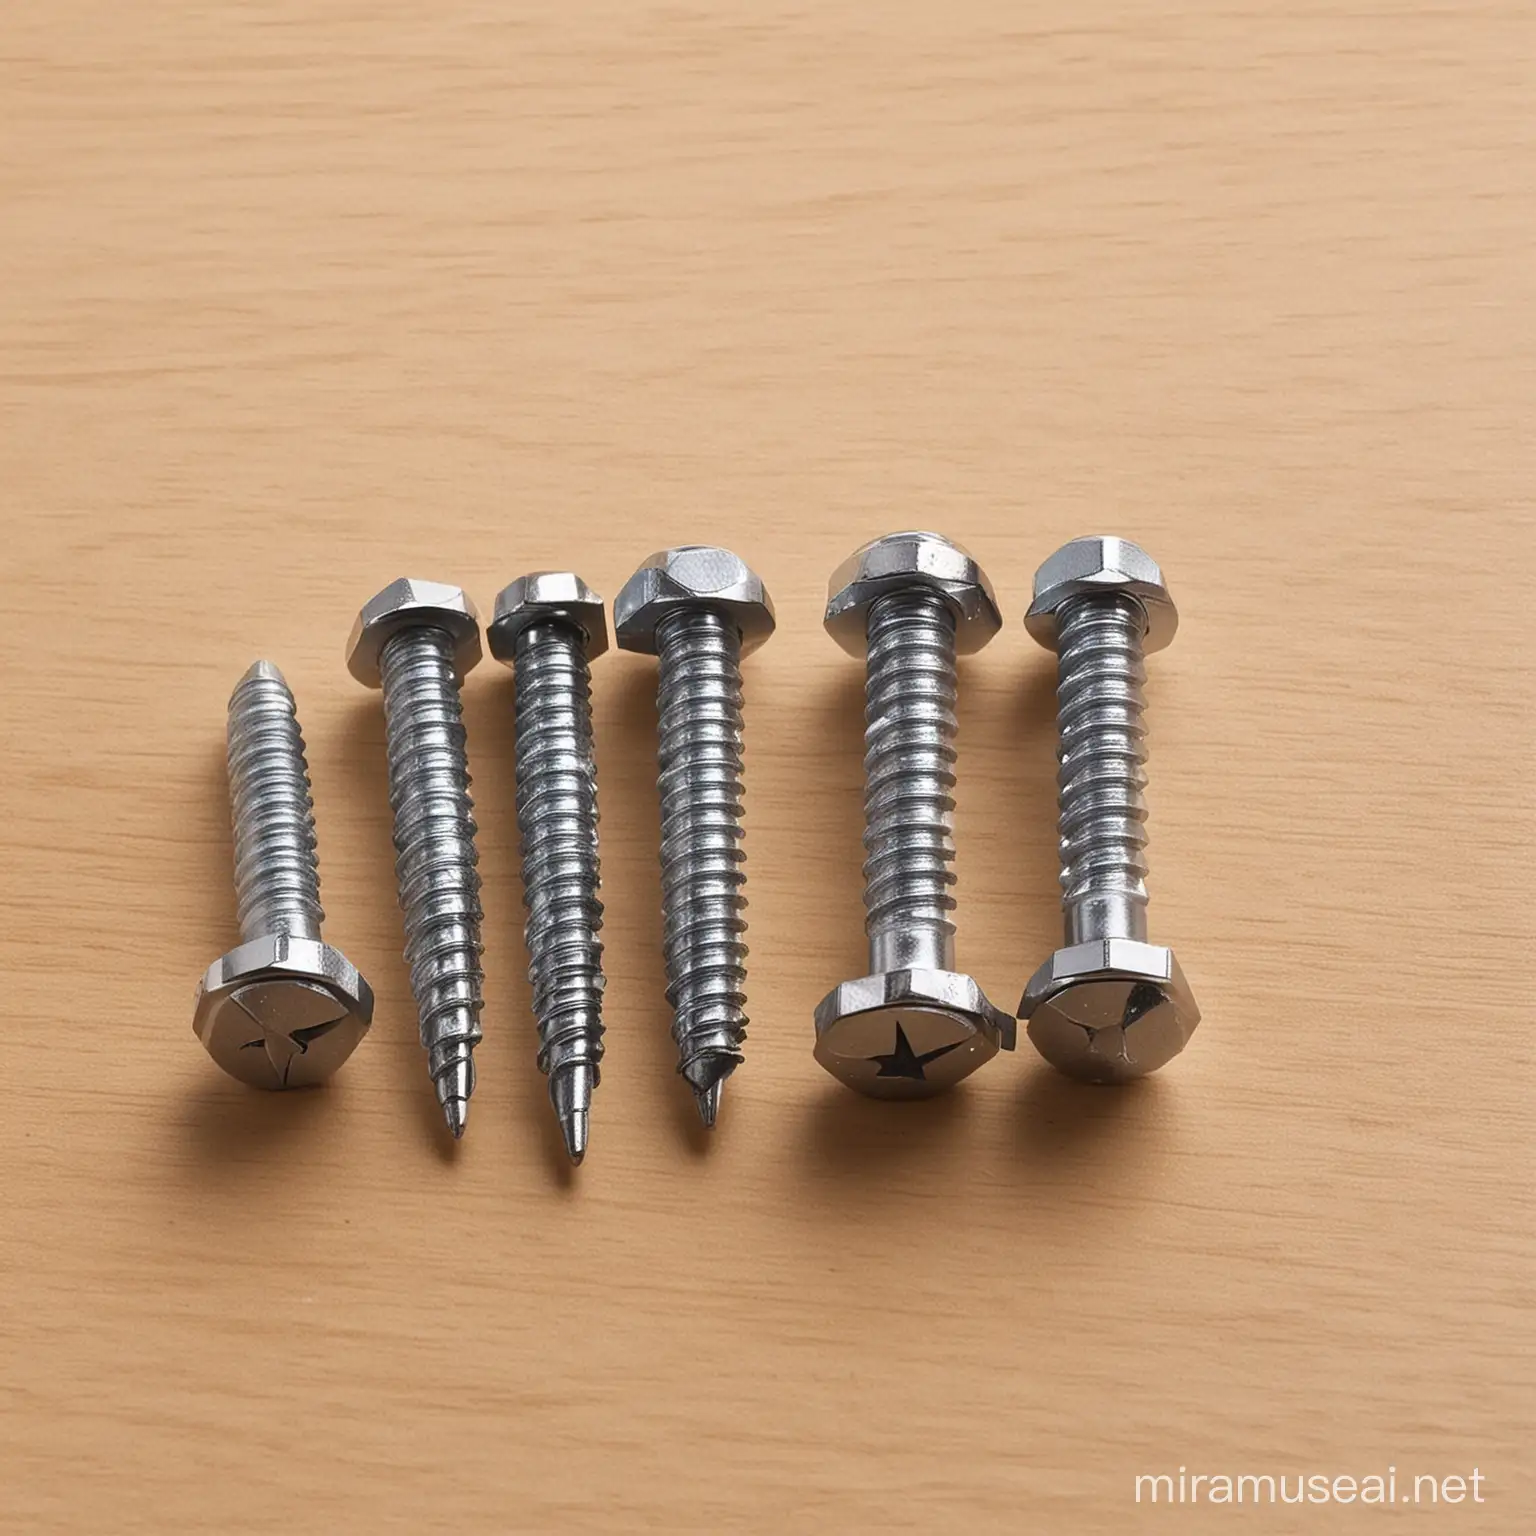 Optimal Hardware Selection for Effective Structure Fixation Screws Nuts and Washers